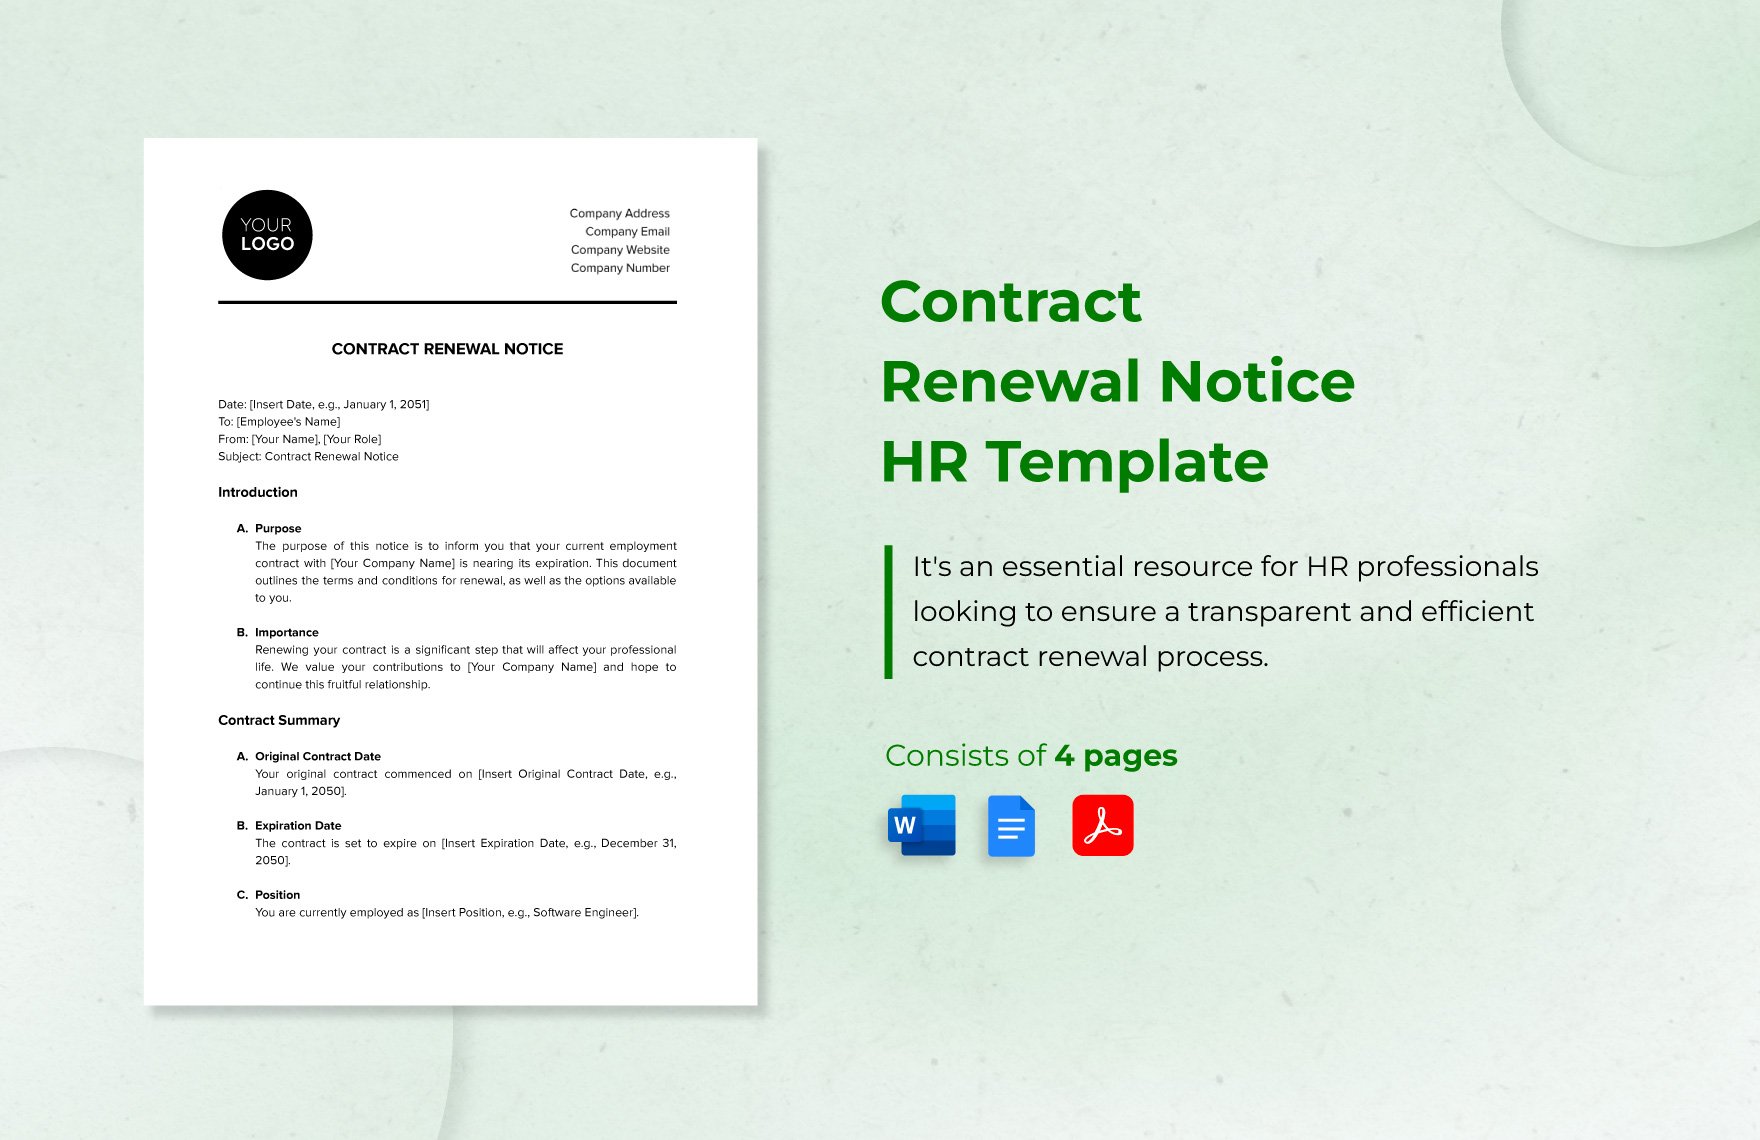 Contract Renewal Notice HR Template